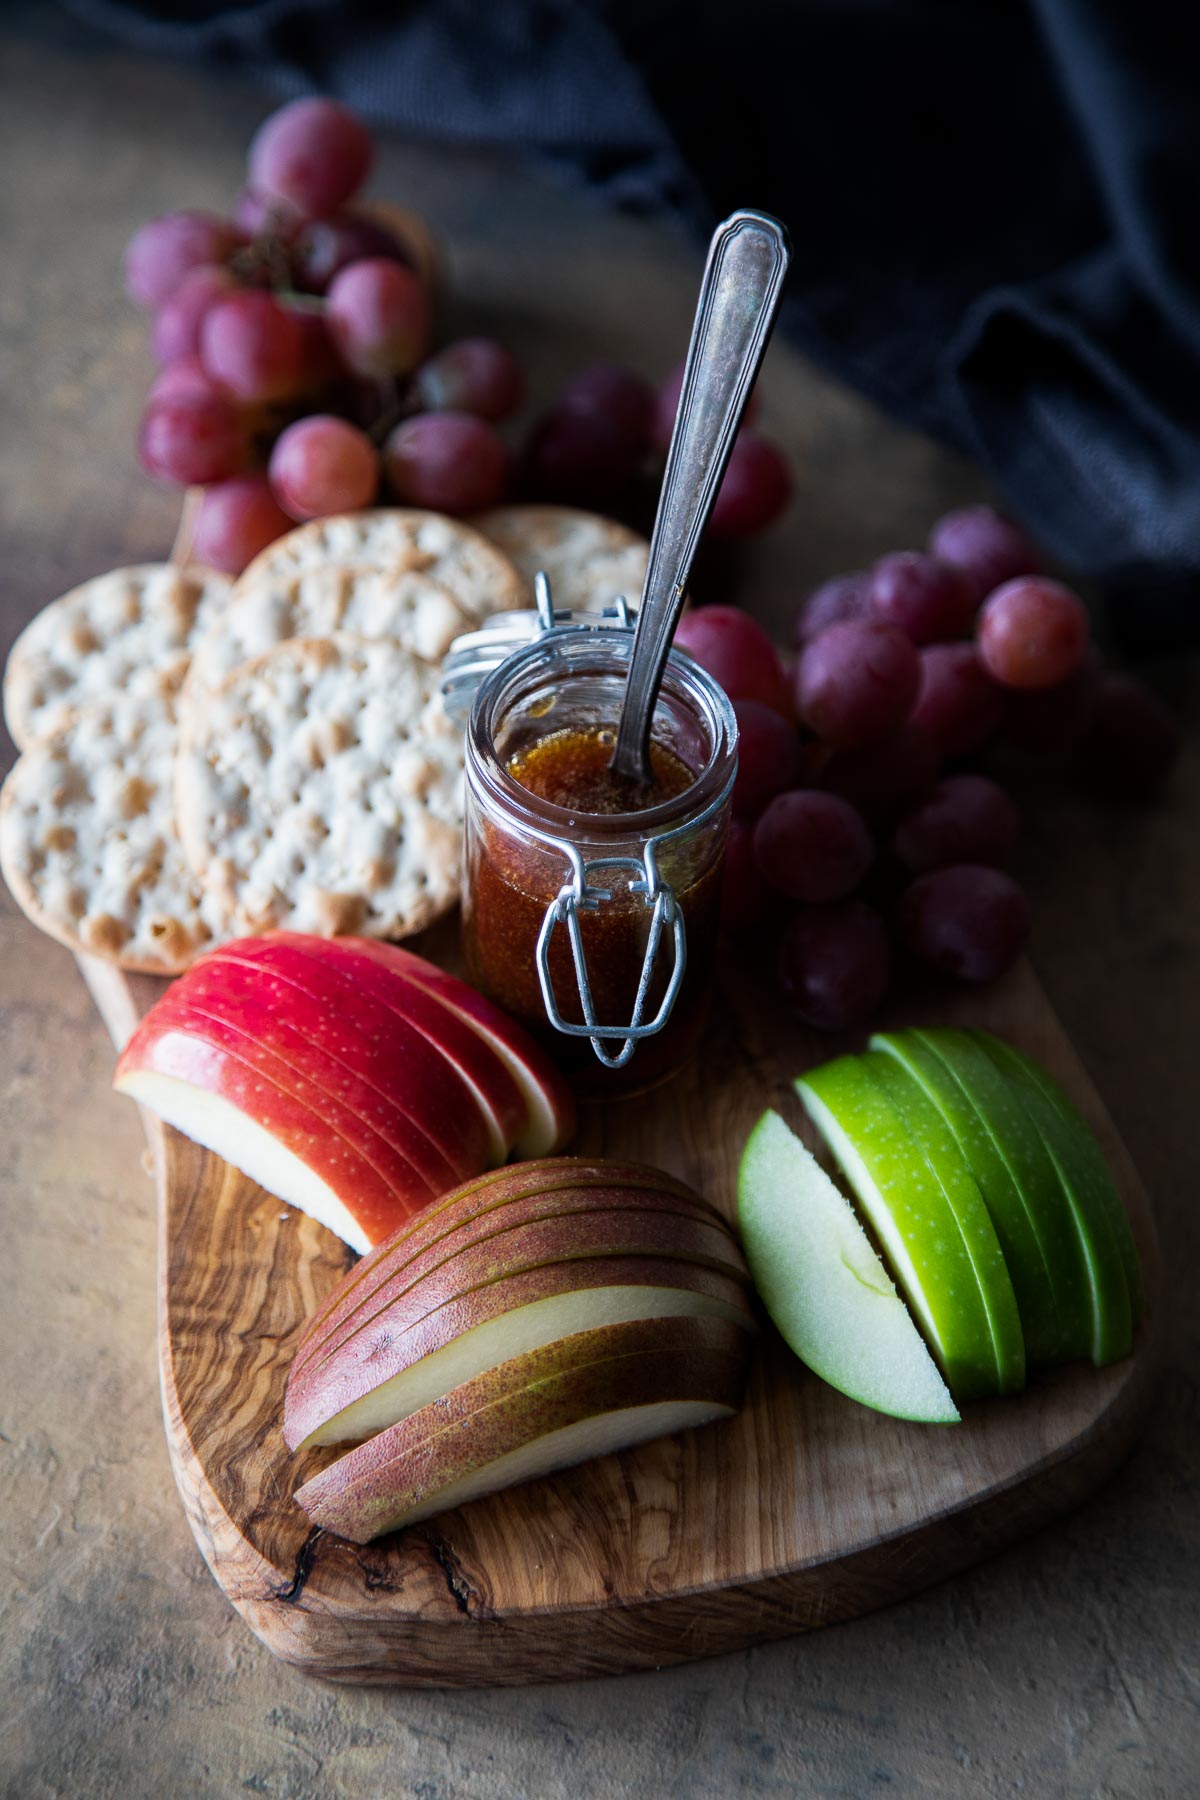 Last Minute Appetizer with sliced pears, apples, persimmons, crackers and honey